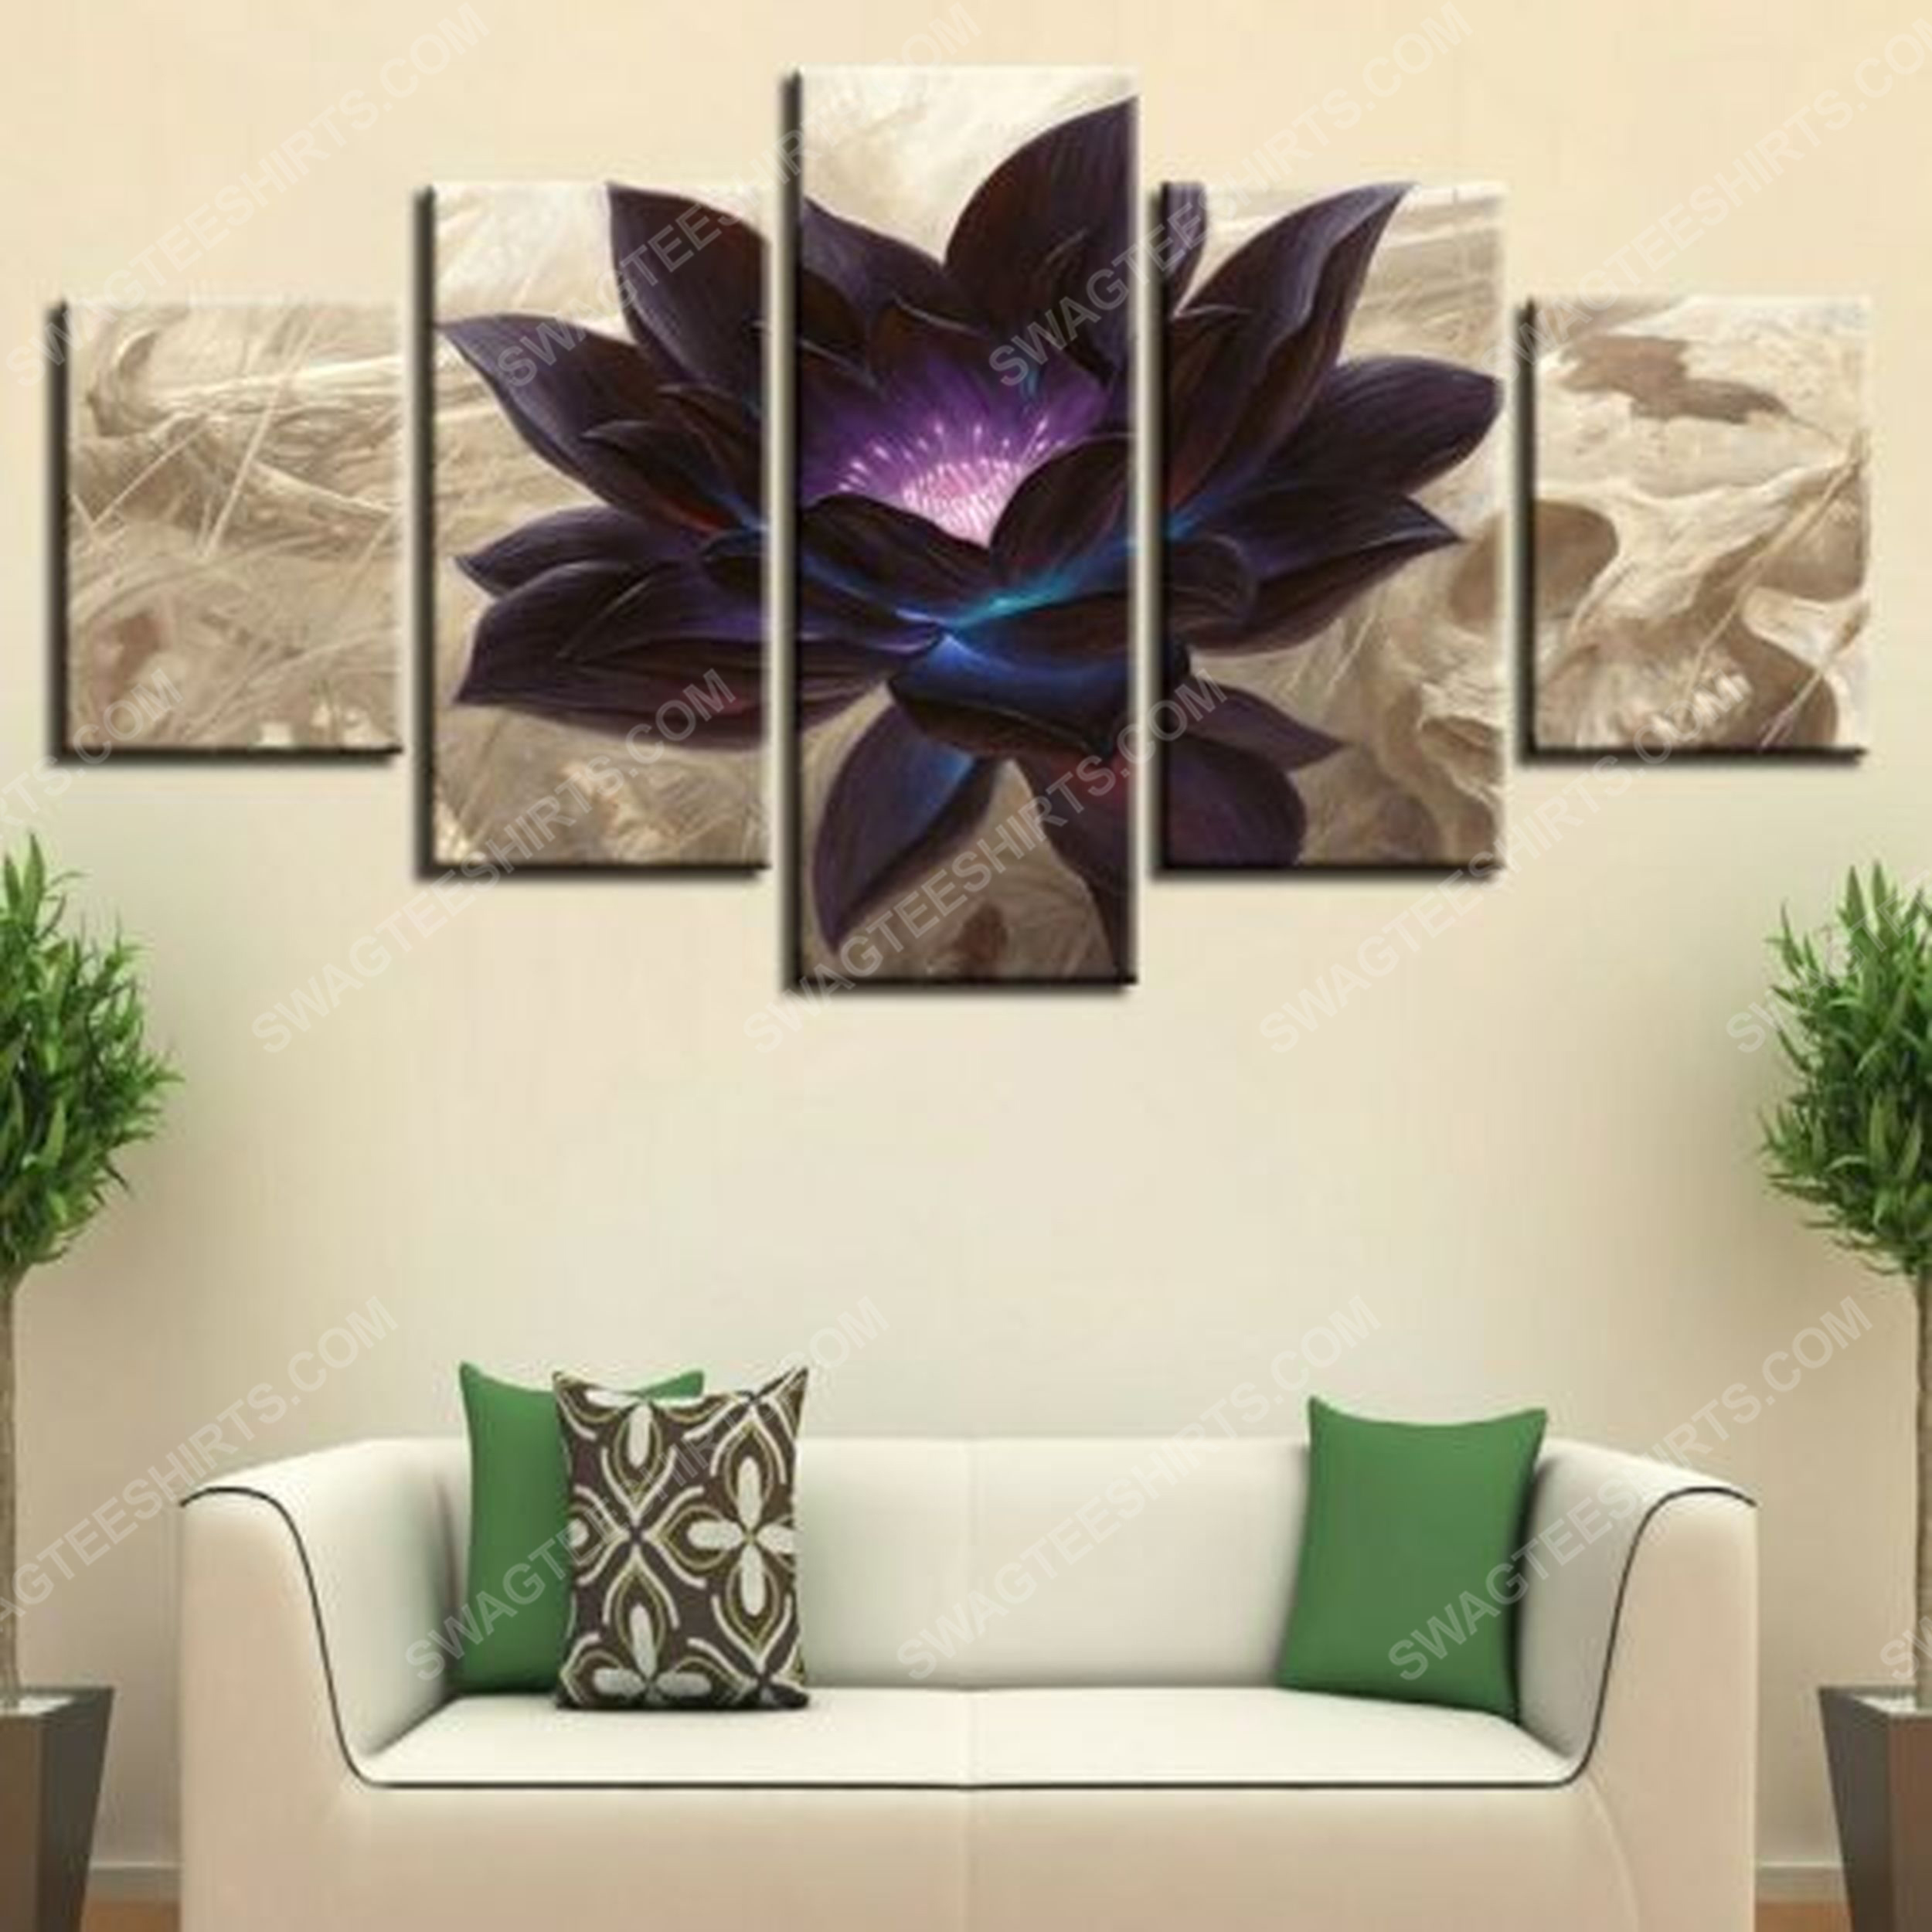 [special edition] Black lotus flower print painting canvas wall art home decor- maria